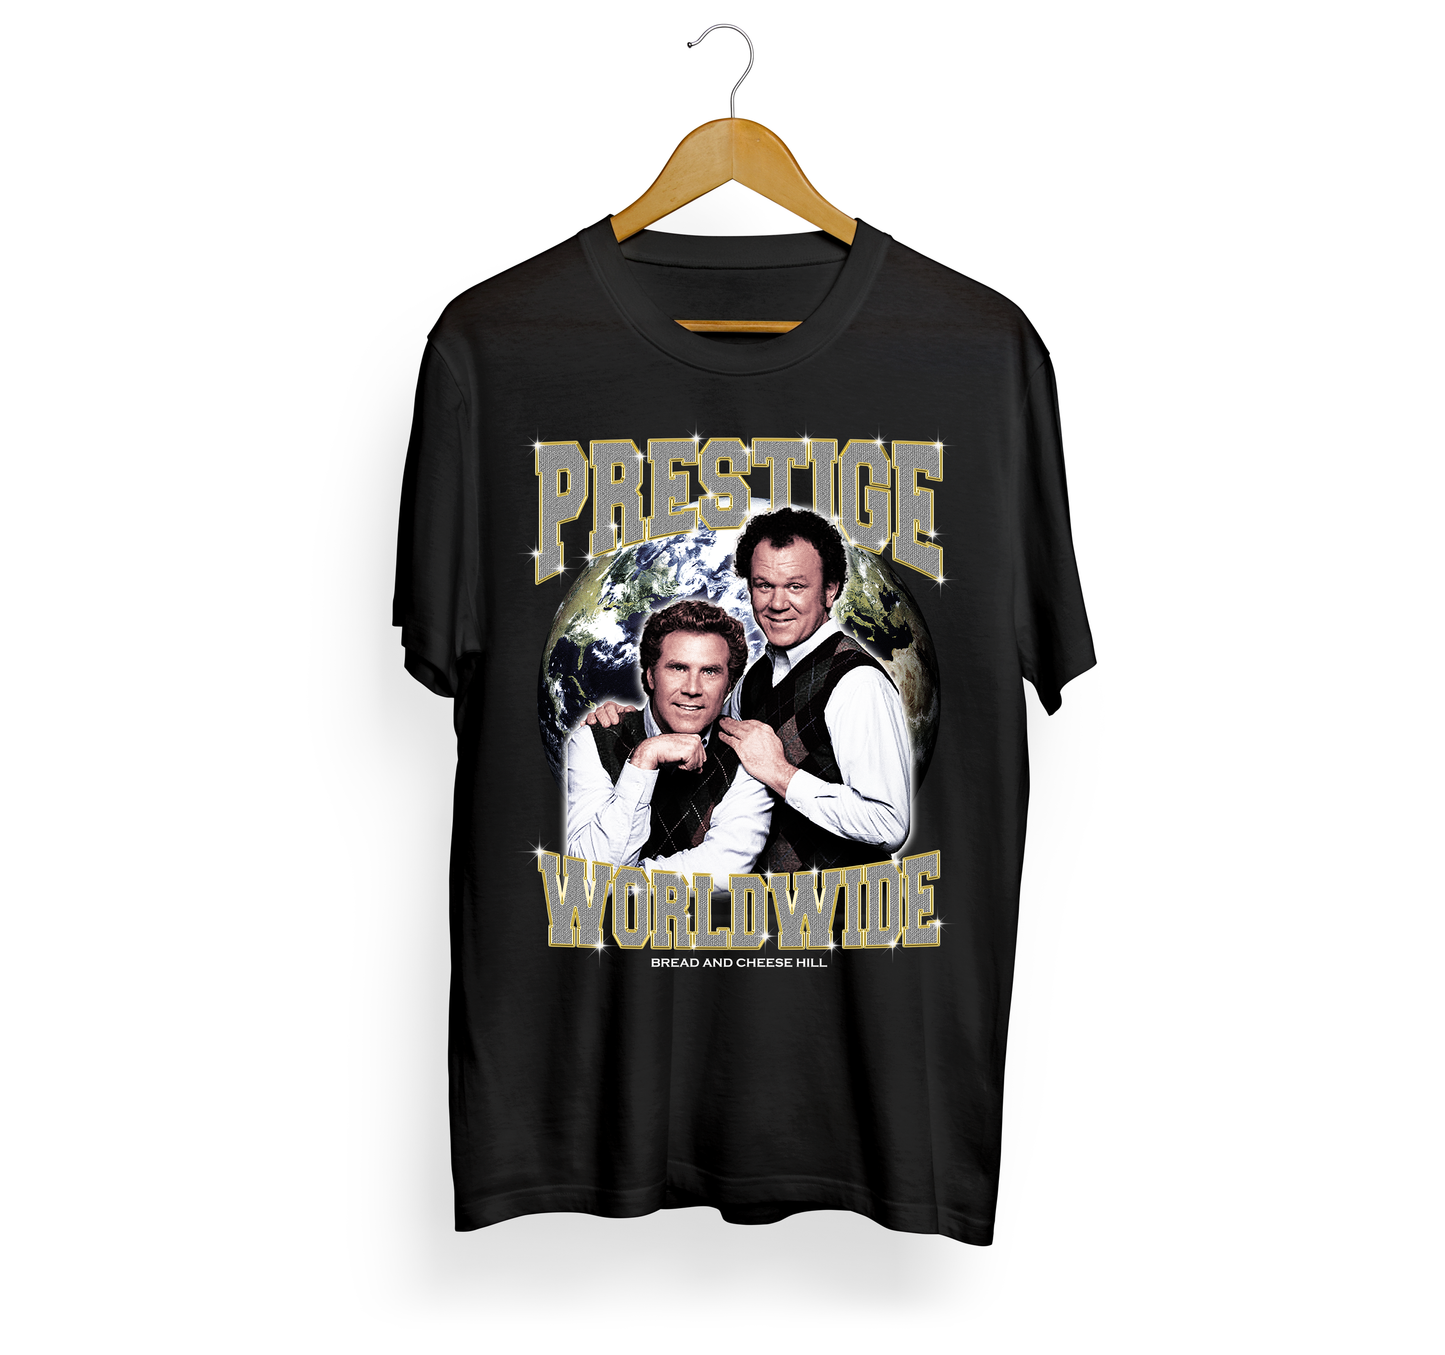 Step Brothers - Prestige Worldwide - BACH T-ShirtBread And Cheese Hill